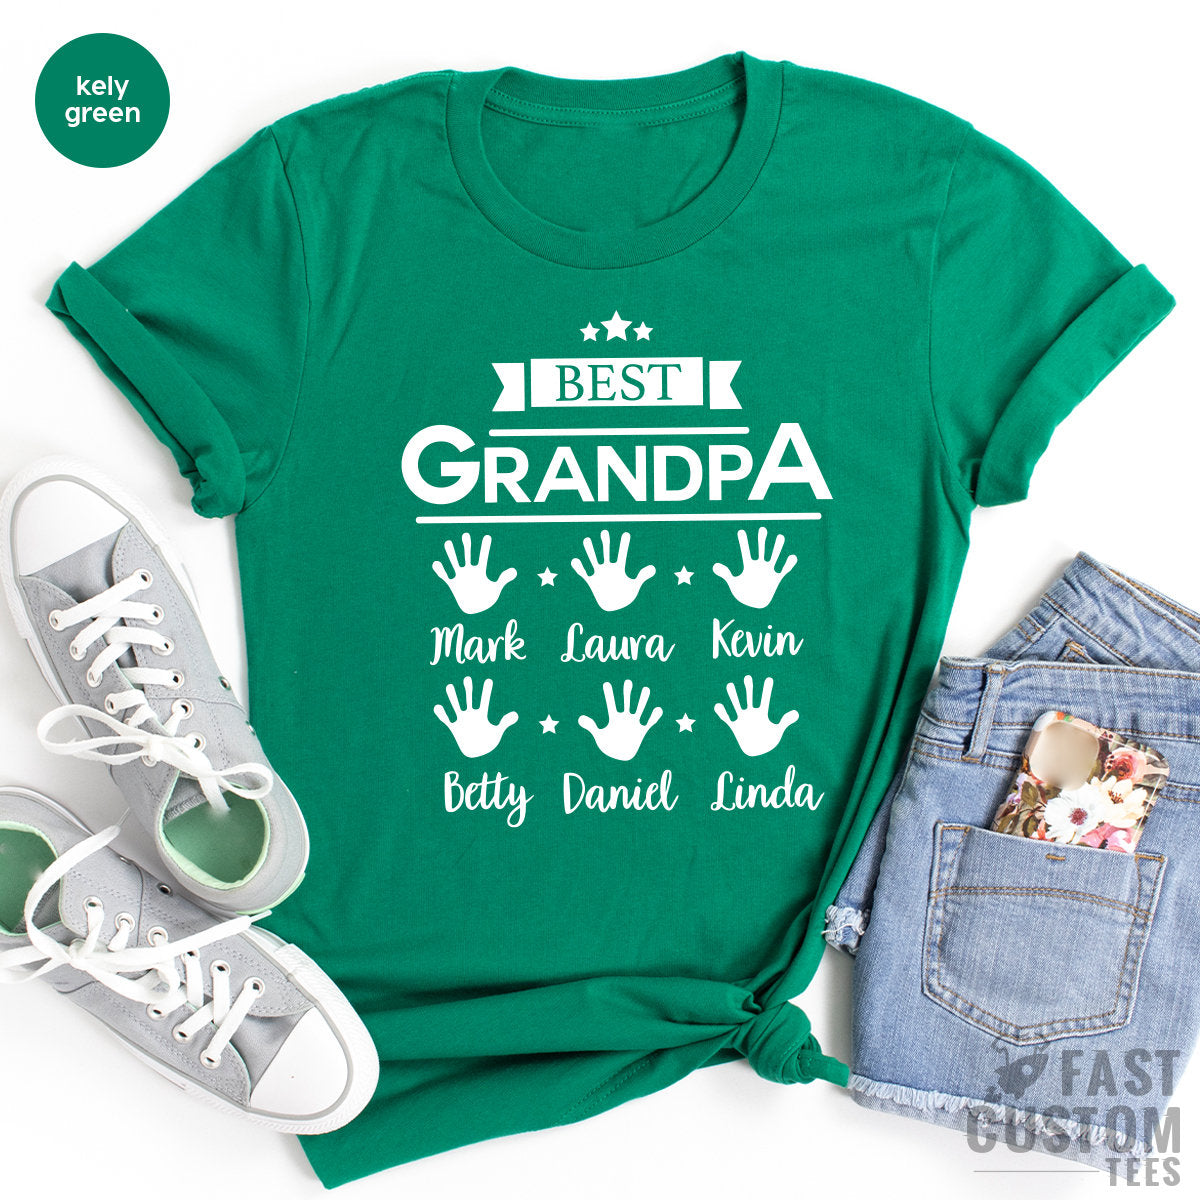 Best Grandpa Shirt, Custom Name T Shirt, Personalized T-Shirt, Fathers Day Shirt, Grandfather Gifts, Men Graphic Tees, Cool Custom Hoodie - Fastdeliverytees.com